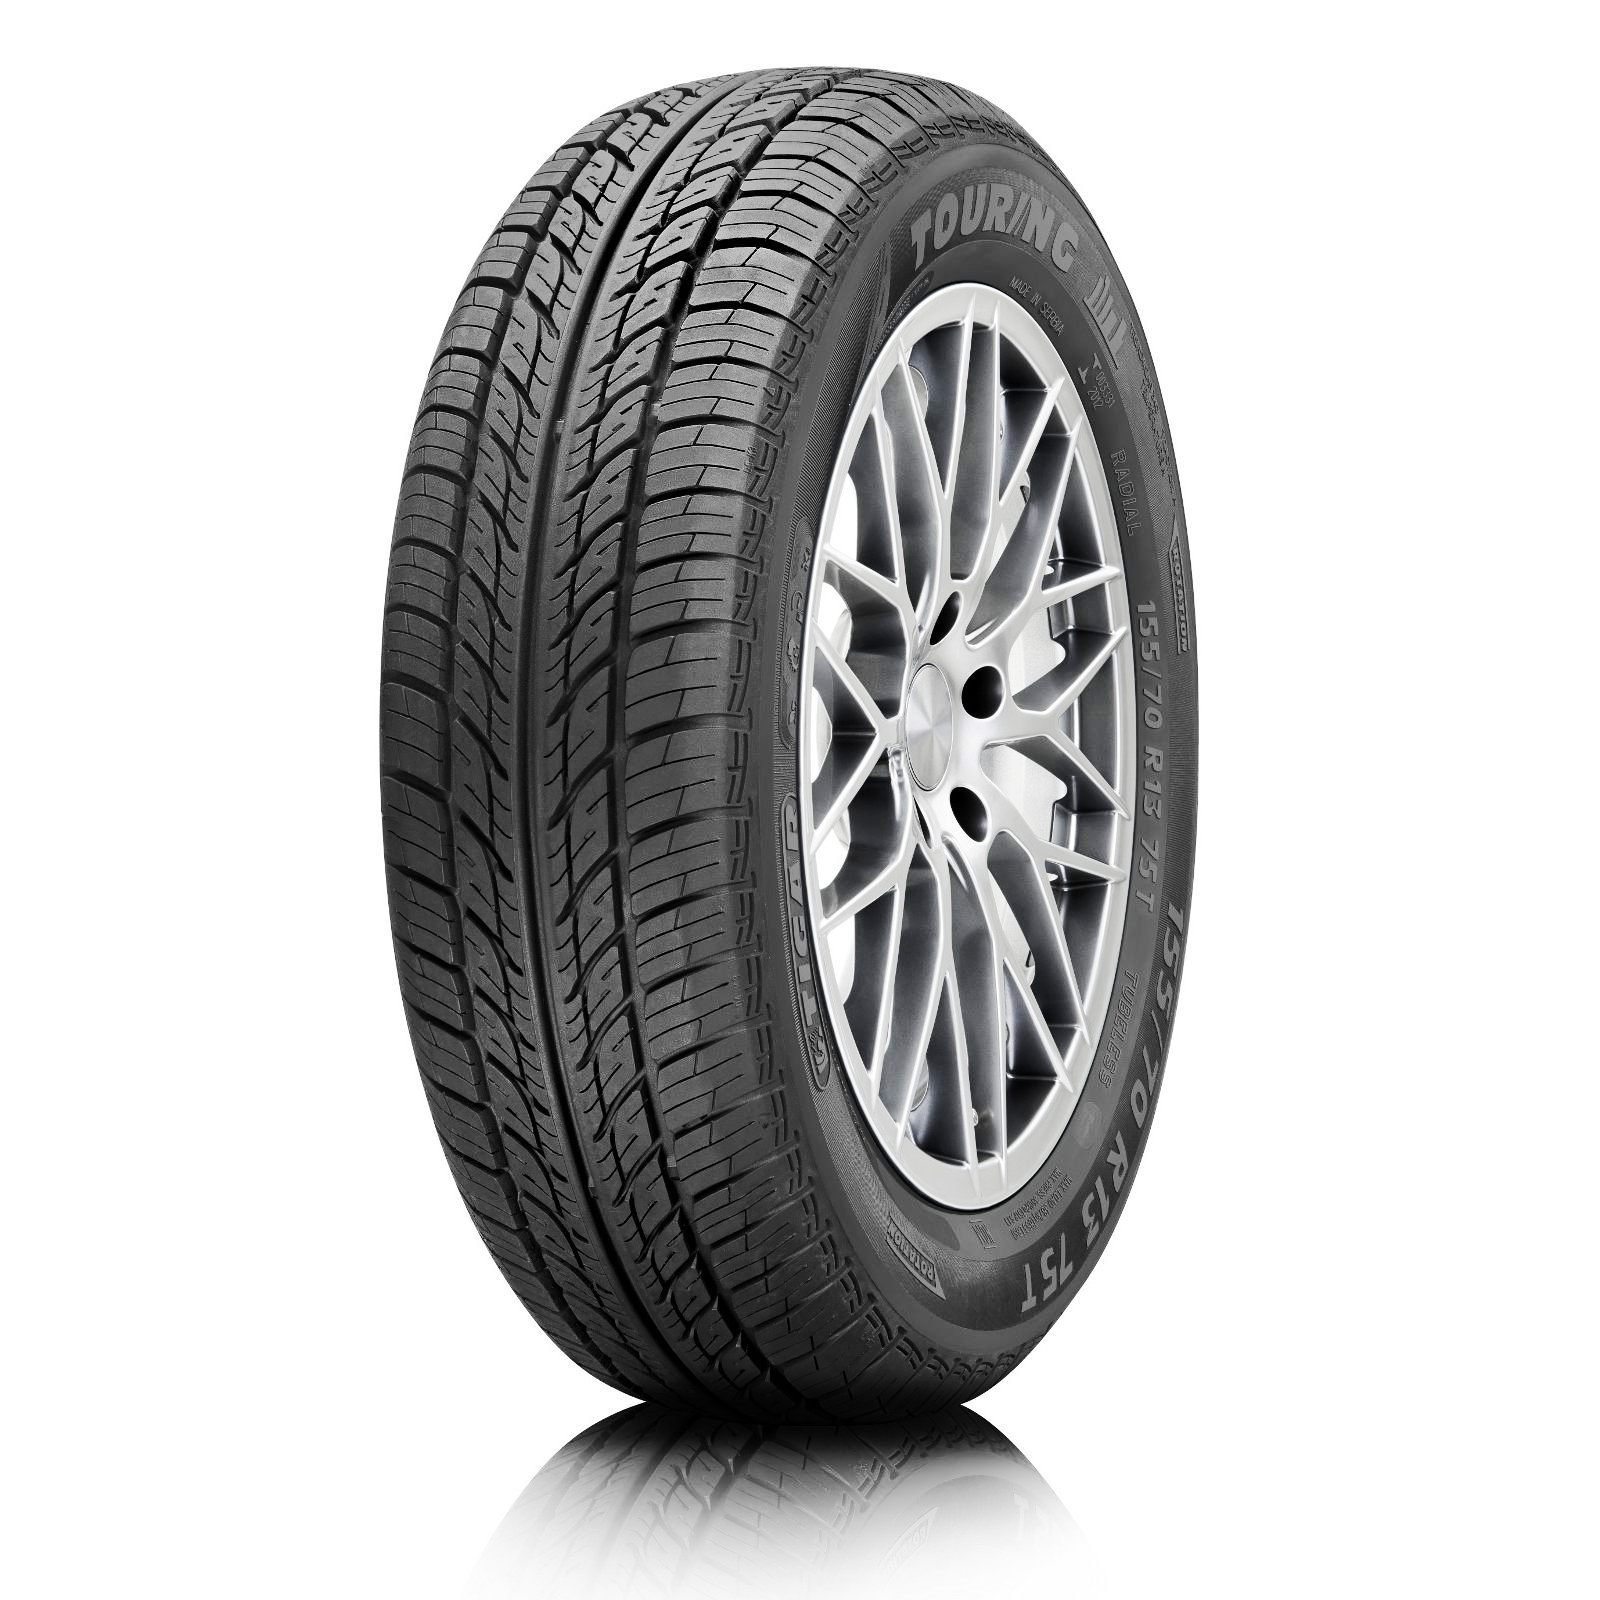 TIGAR Touring 145/80 R13 75T